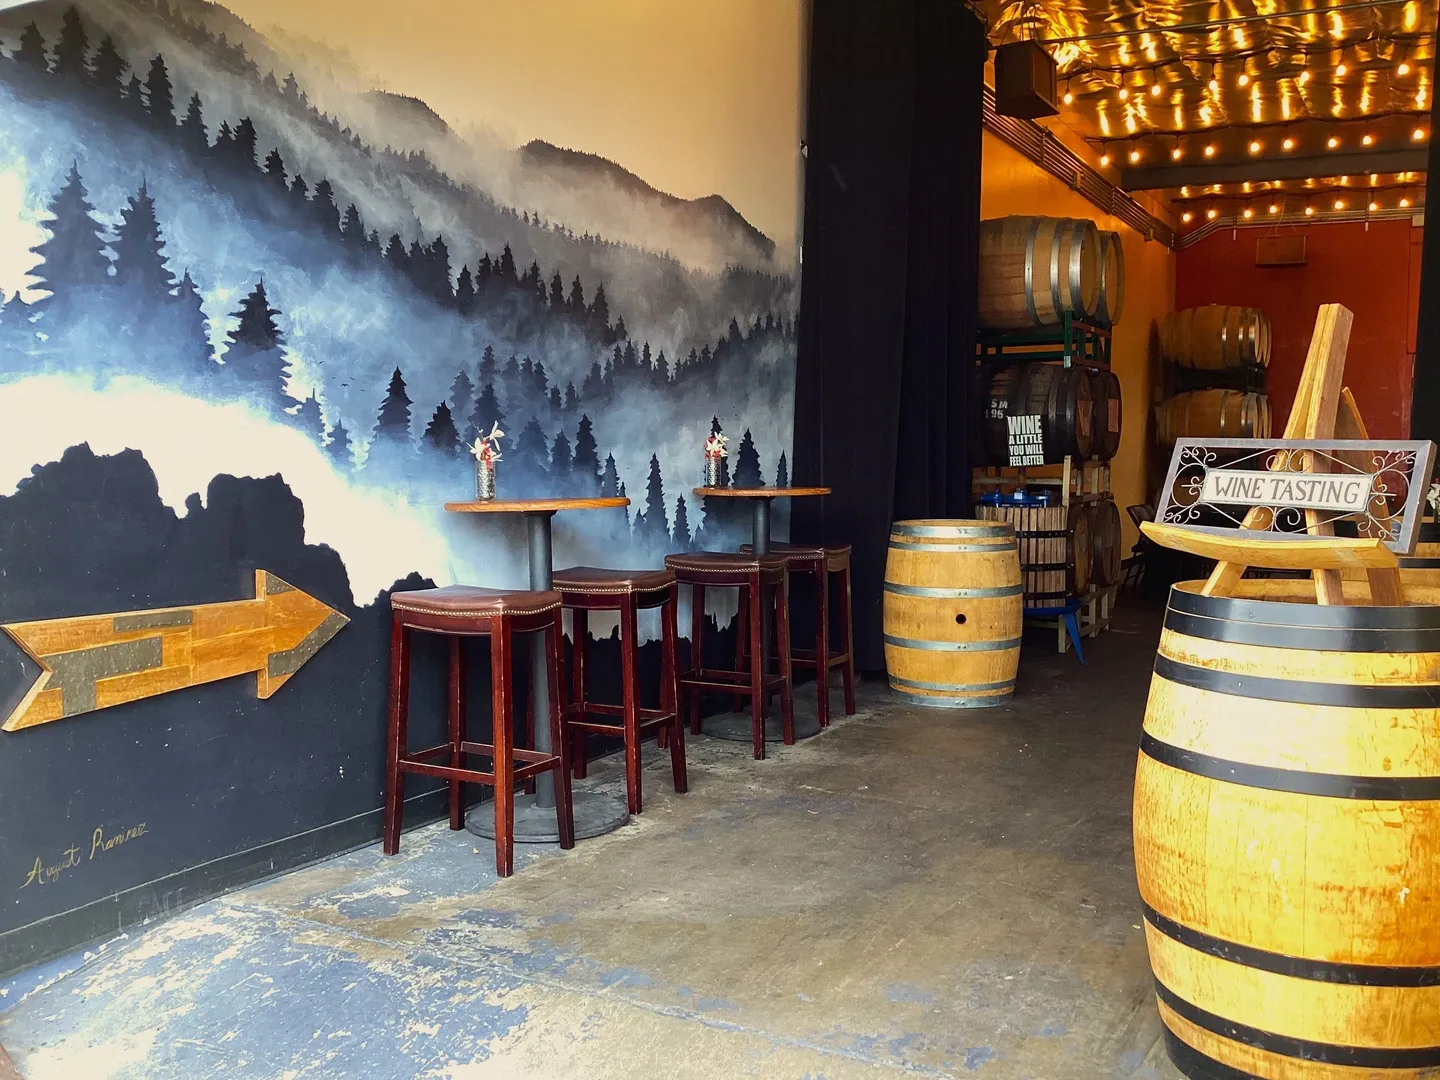 A room with a wall mural and barrels